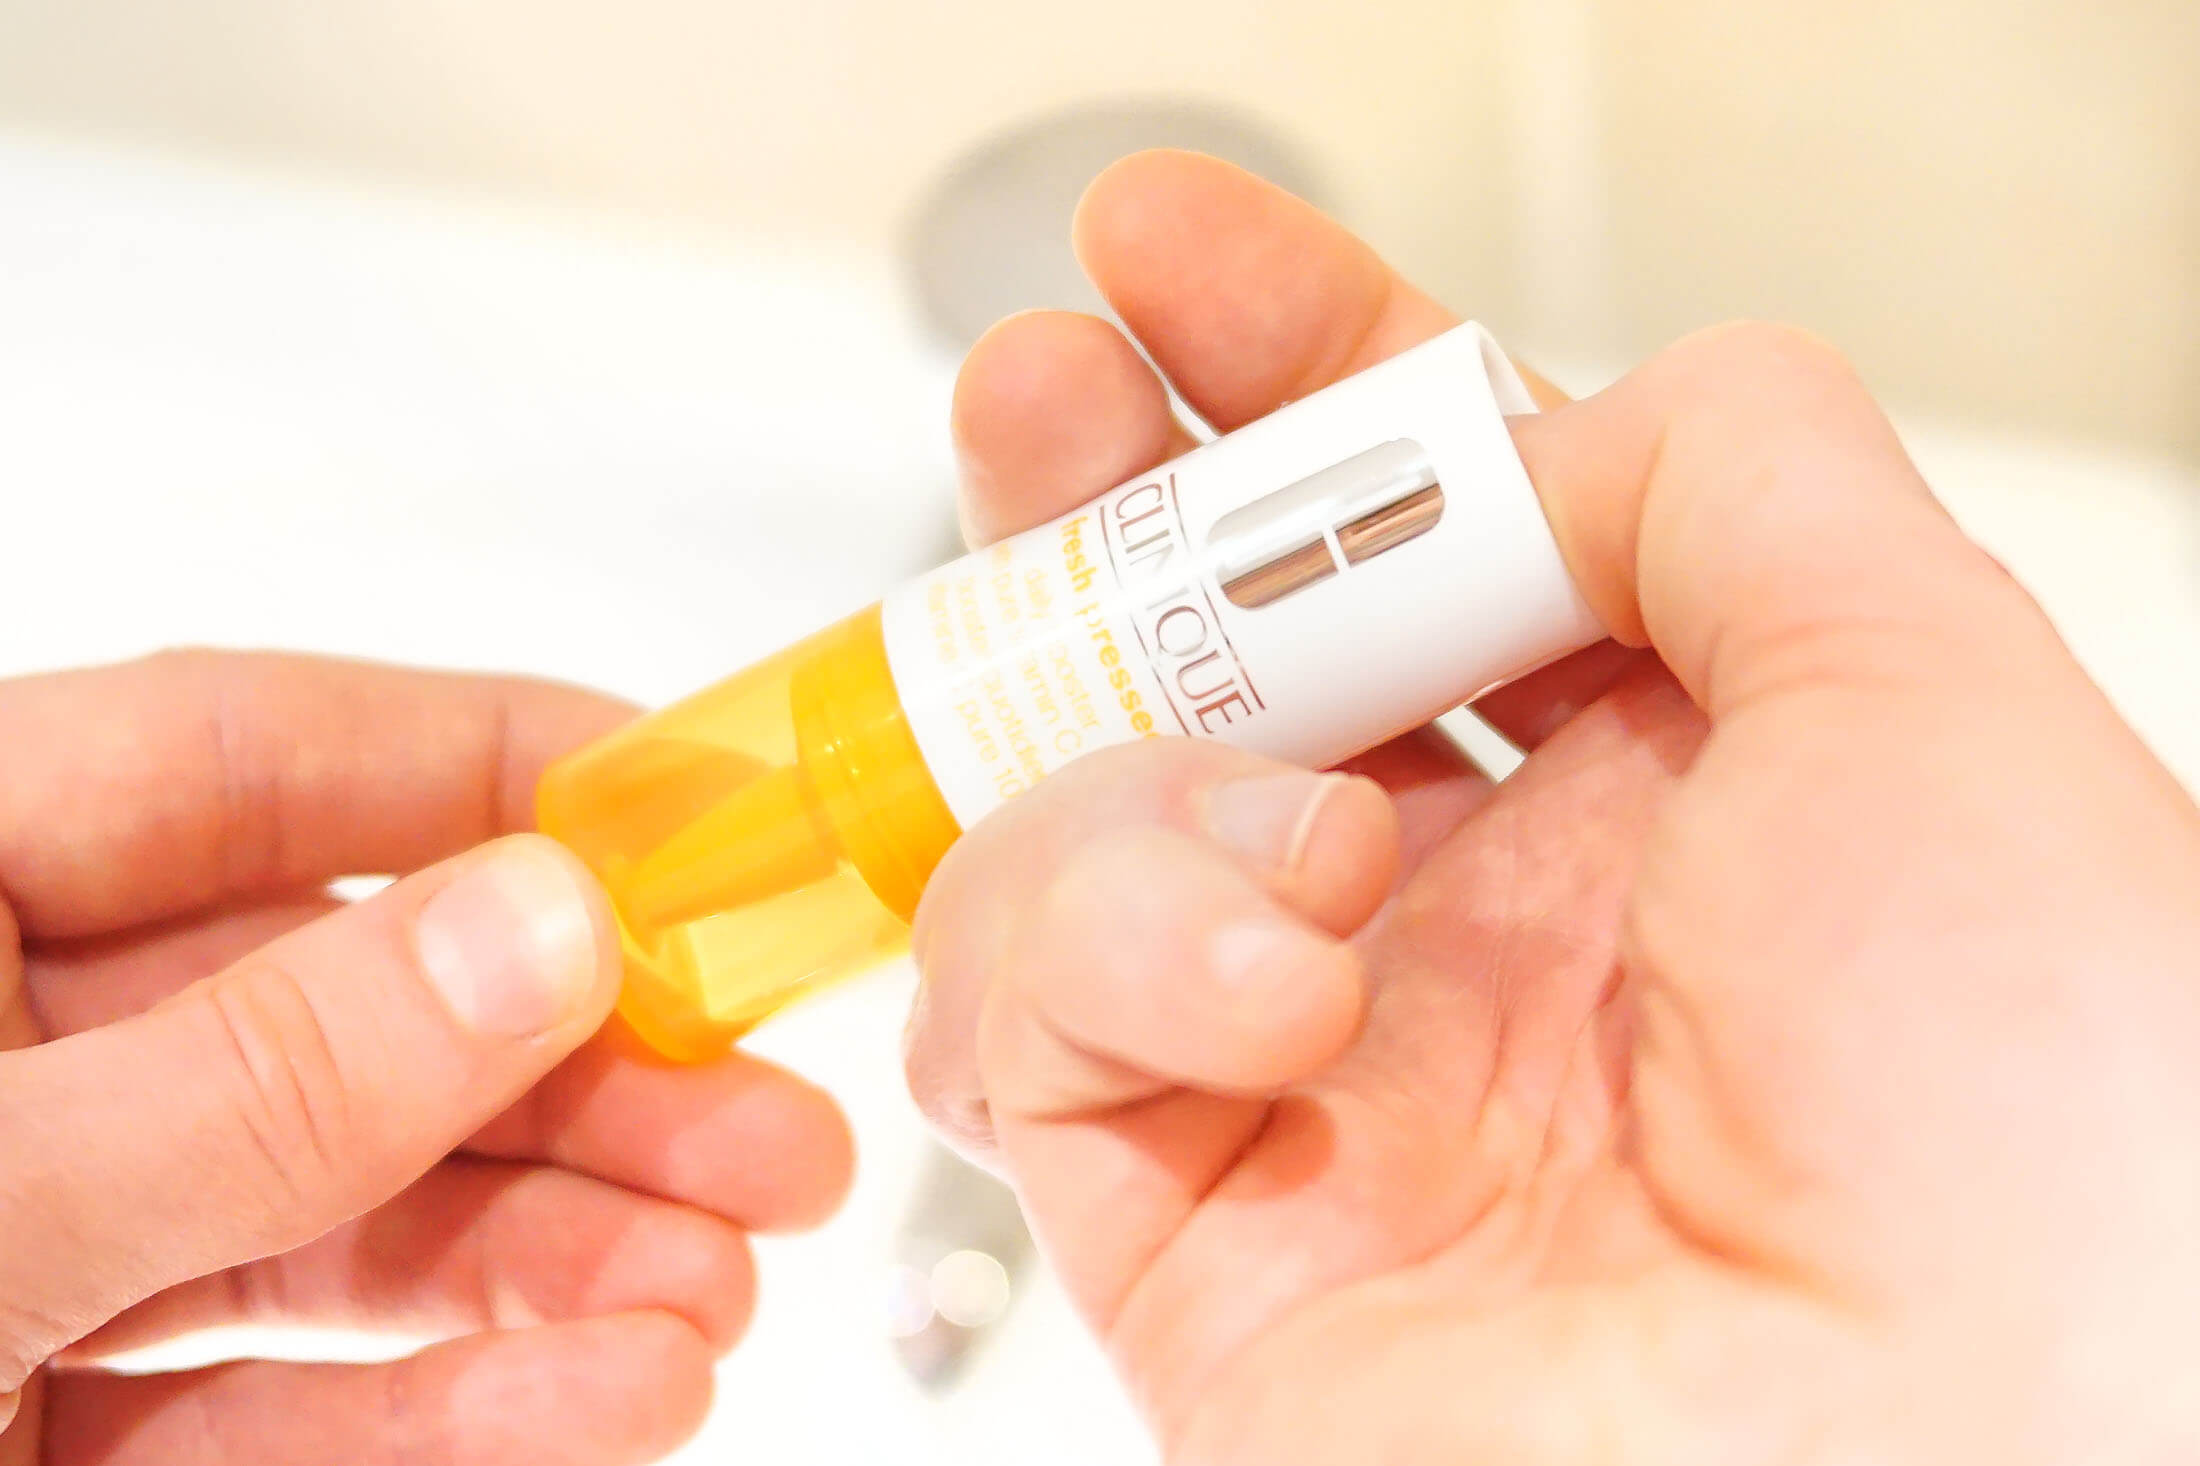 CLINIQUE,Fresh Pressed Daily Booster With Pure Vitamin C 10%,วิตามินซีสกัดเข้มข้น